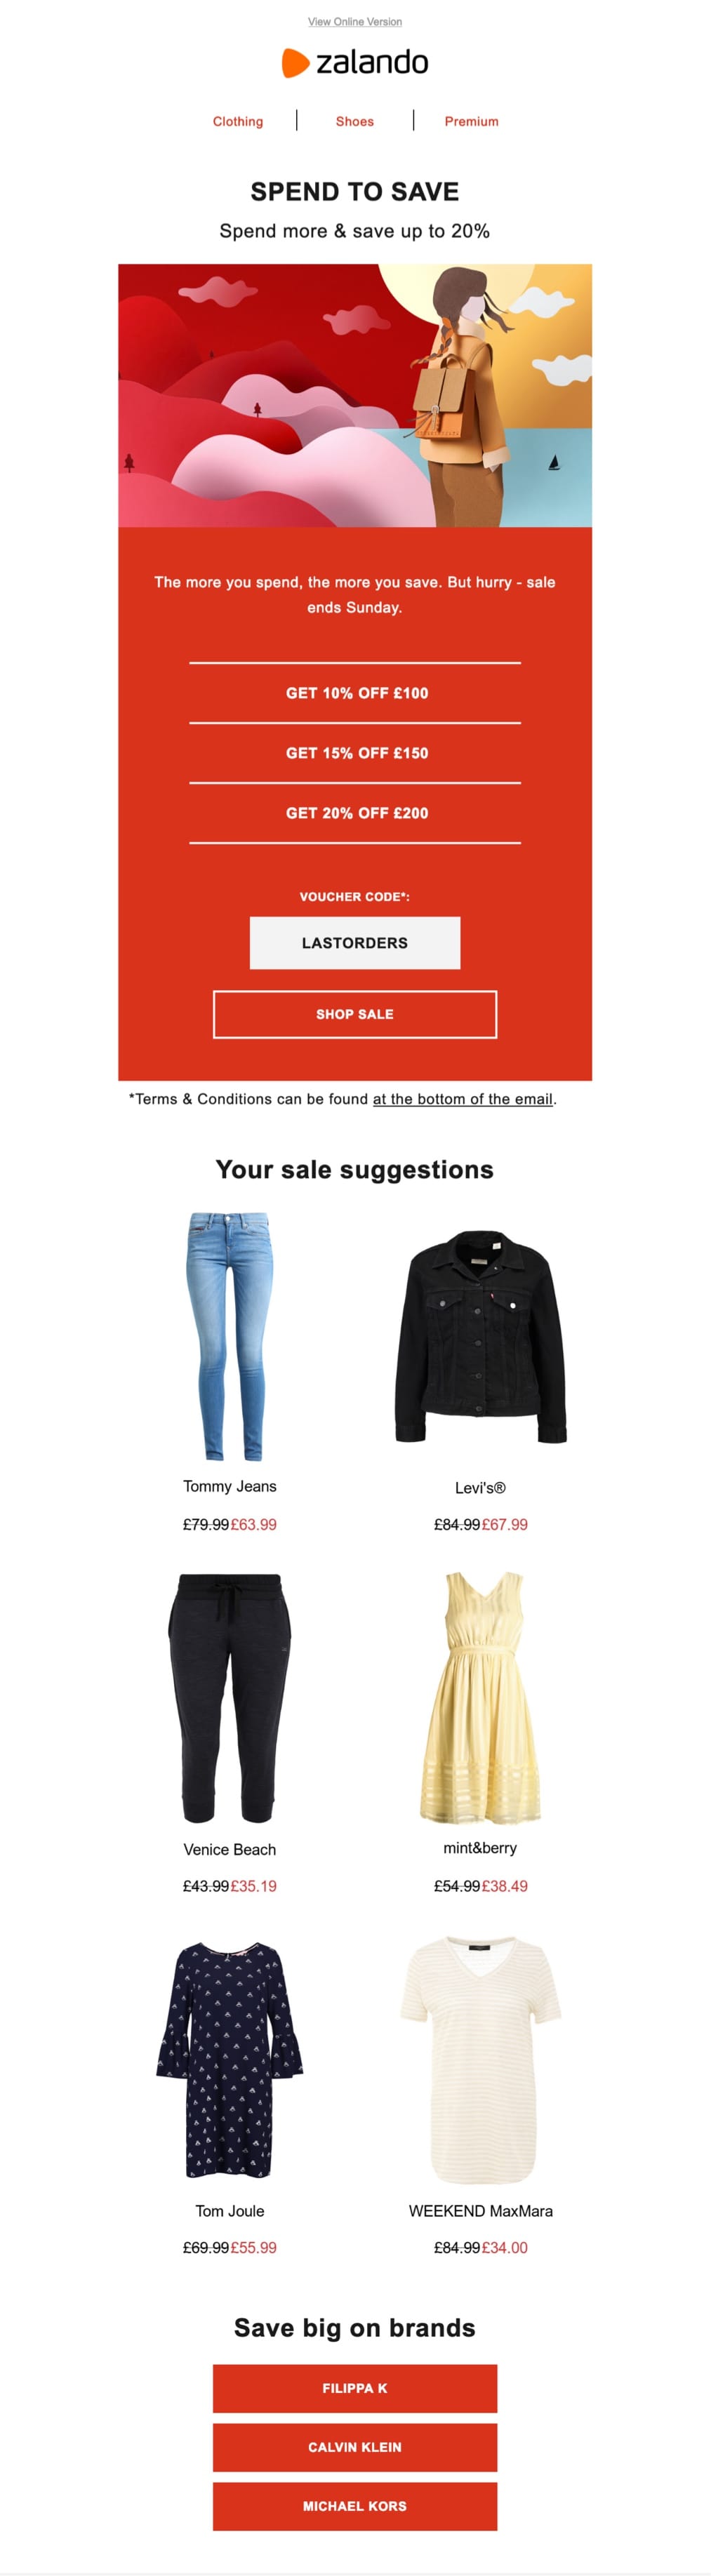 email example zalando (sale email)